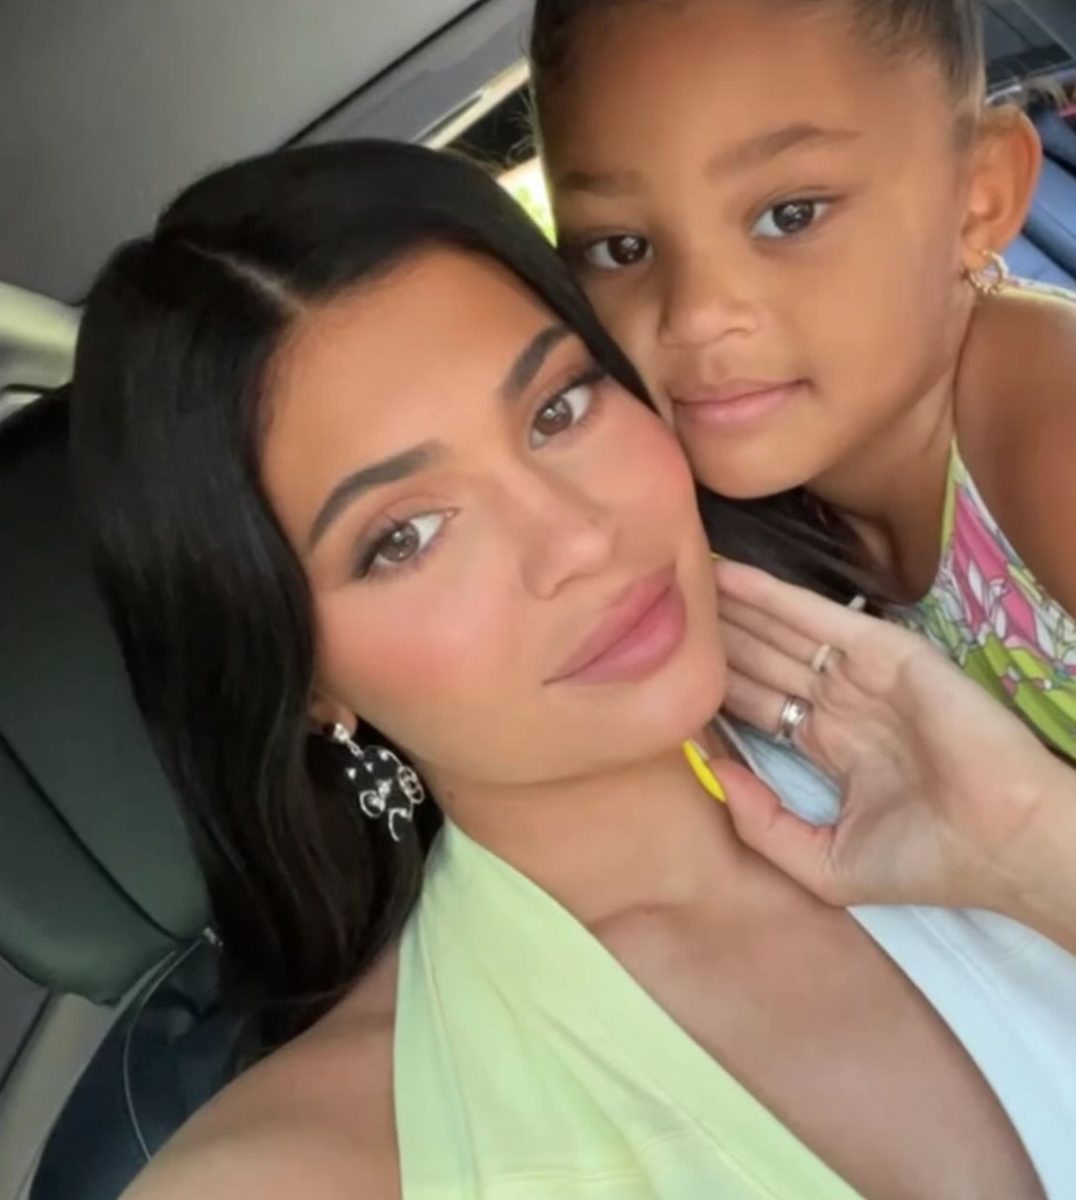 Kylie Jenner Shares Heartbreaking Reason Why She Changed Her Son's Name | Kylie Jenner is opening up about the events that took place that ultimately led to her changing her 1-year-old son’s name.